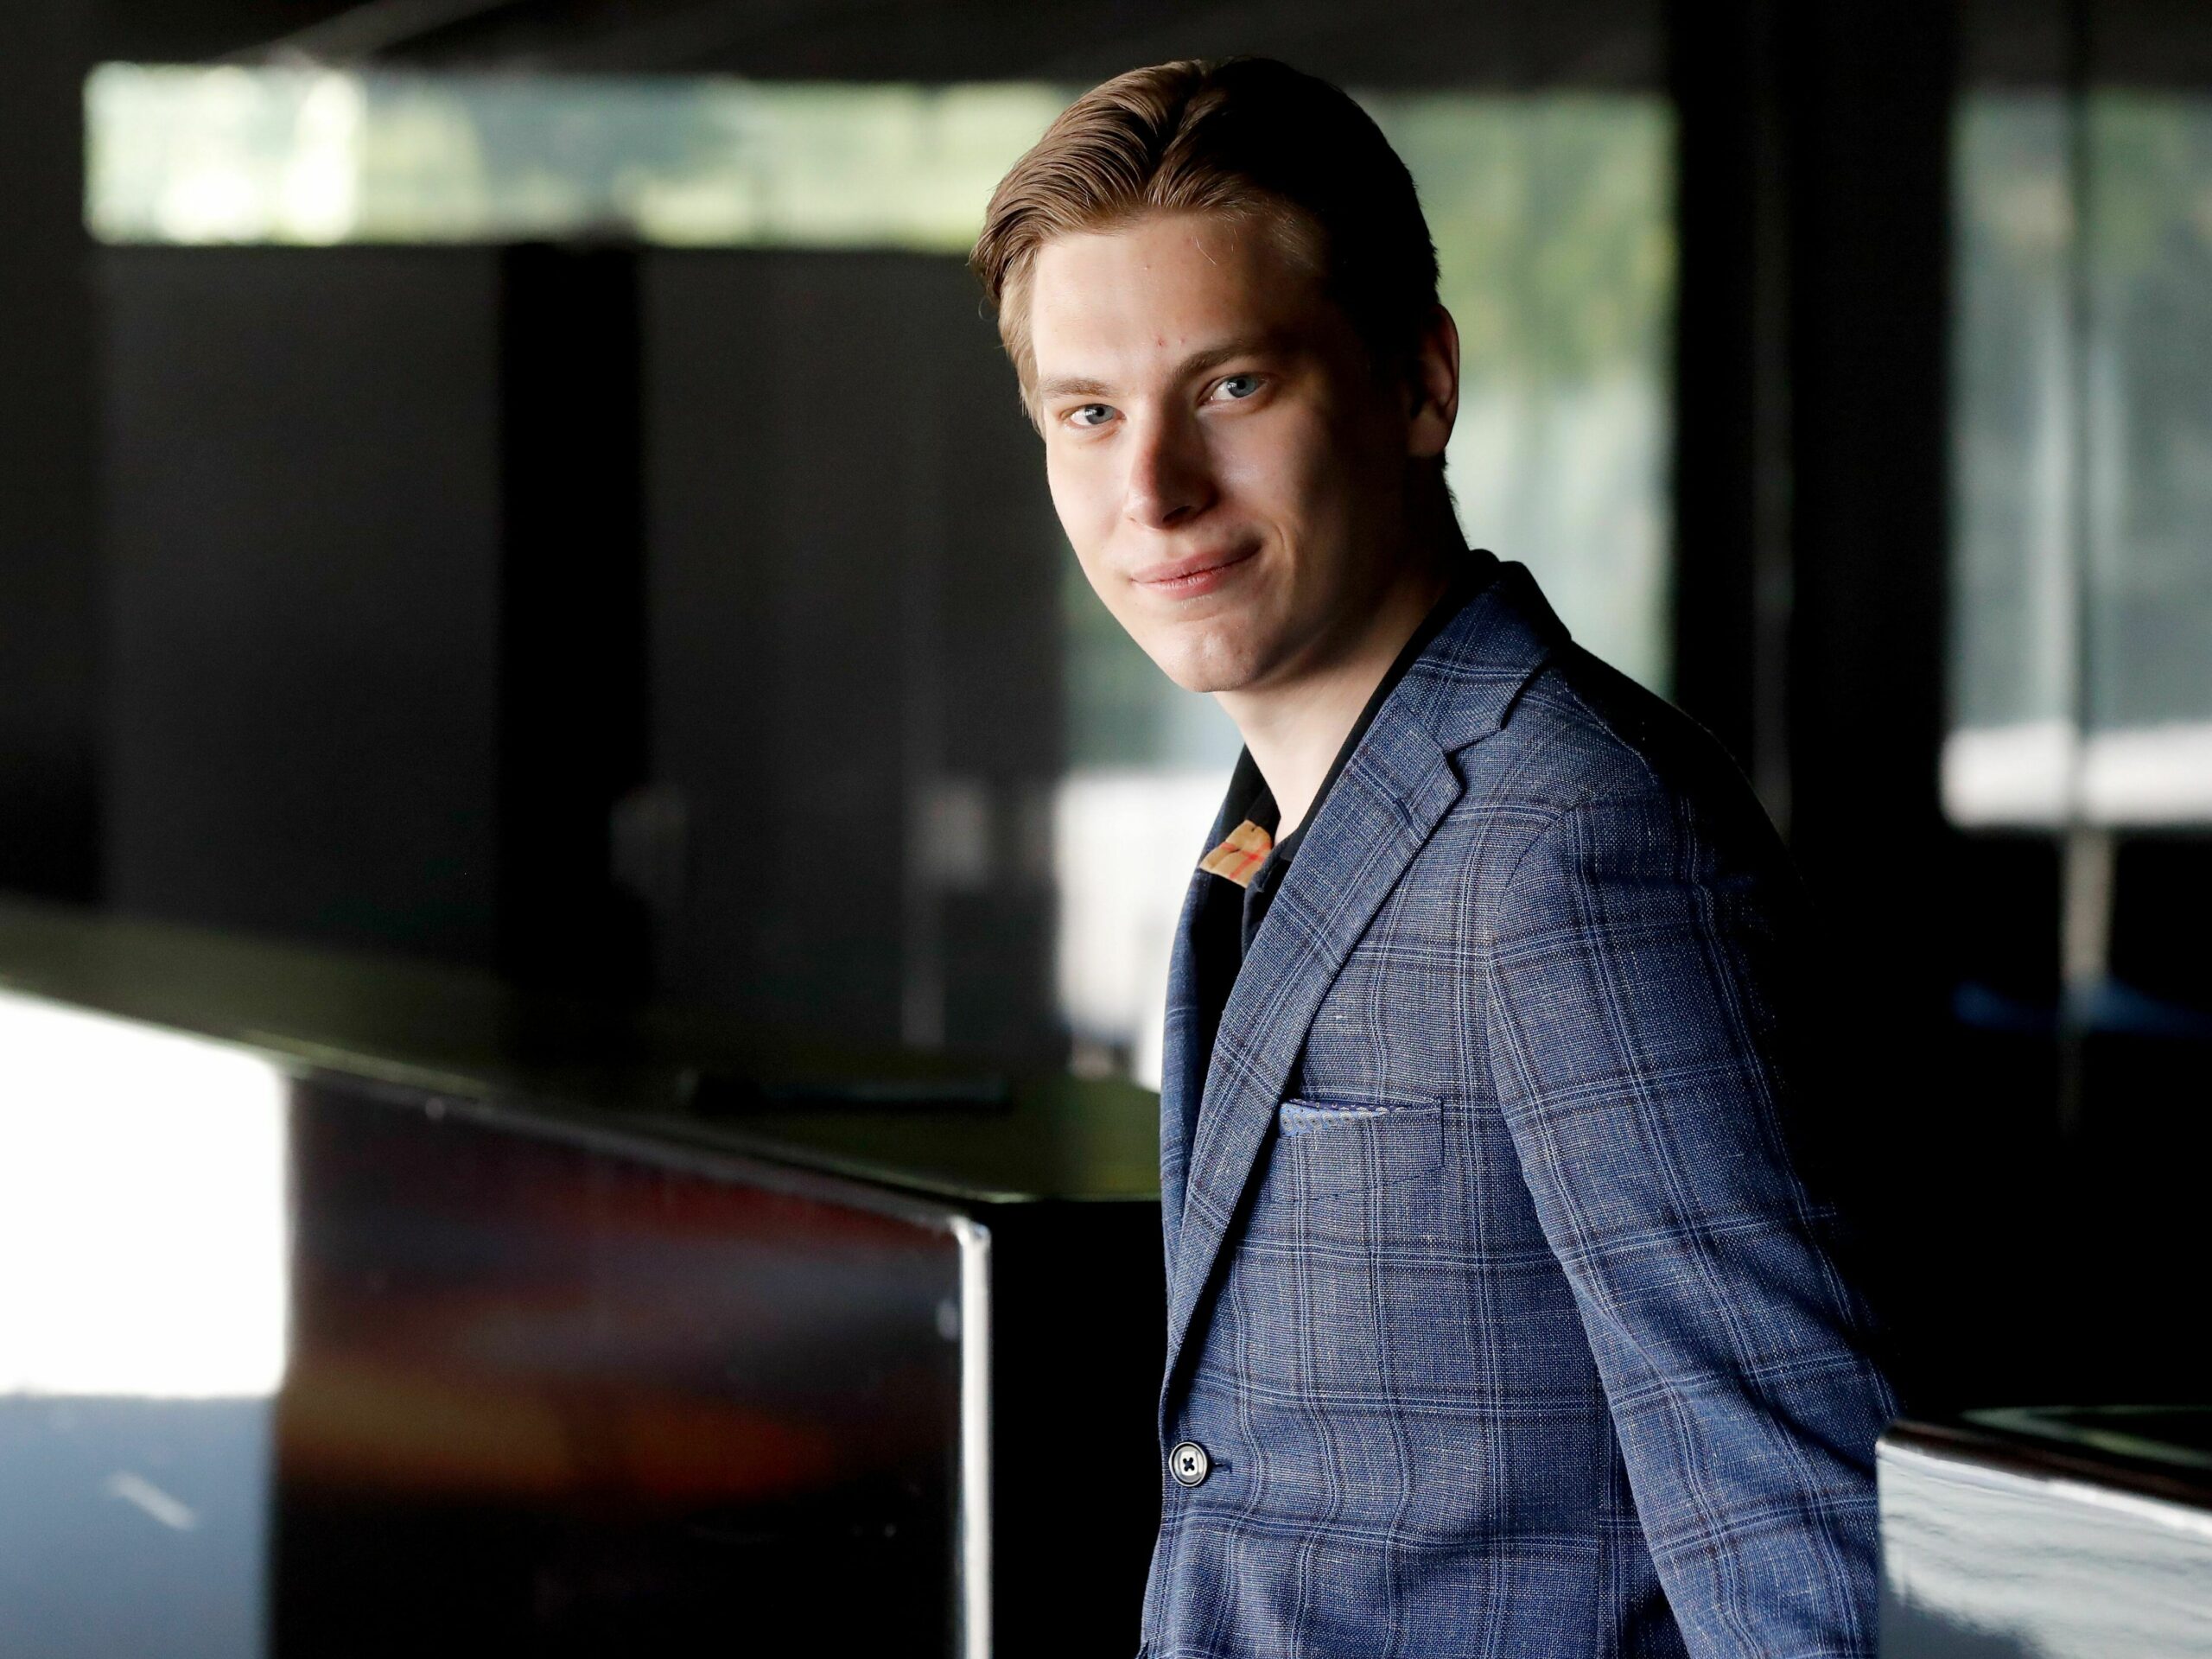 28-year-old conductor Klaus Mäkelä will lead the Chicago Symphony Orchestra